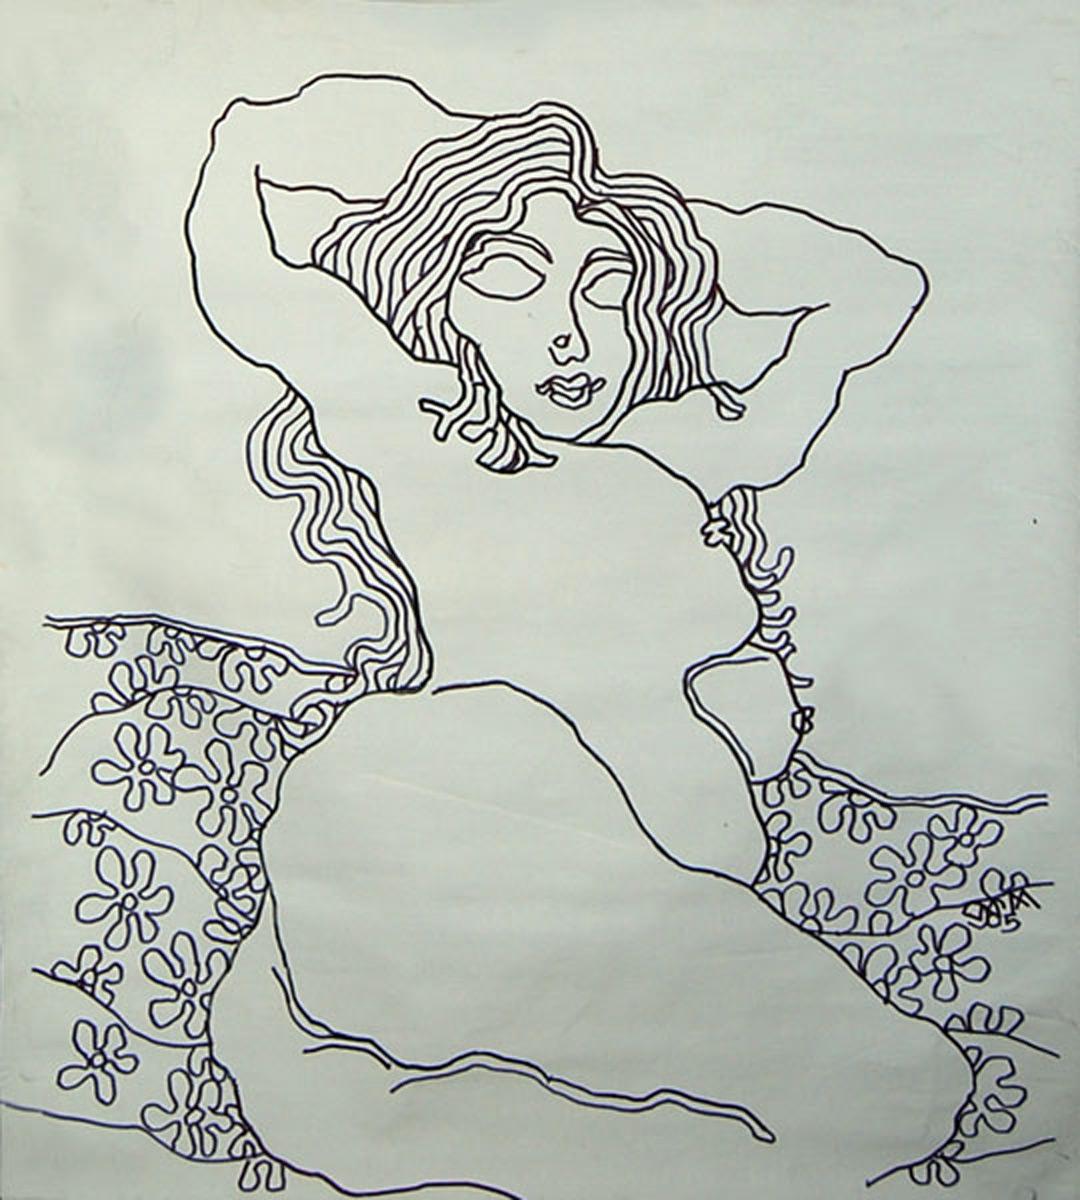 Lady with Flowers, Nude Drawing, Ink on canvas by Indian Modern Master "In Stock"